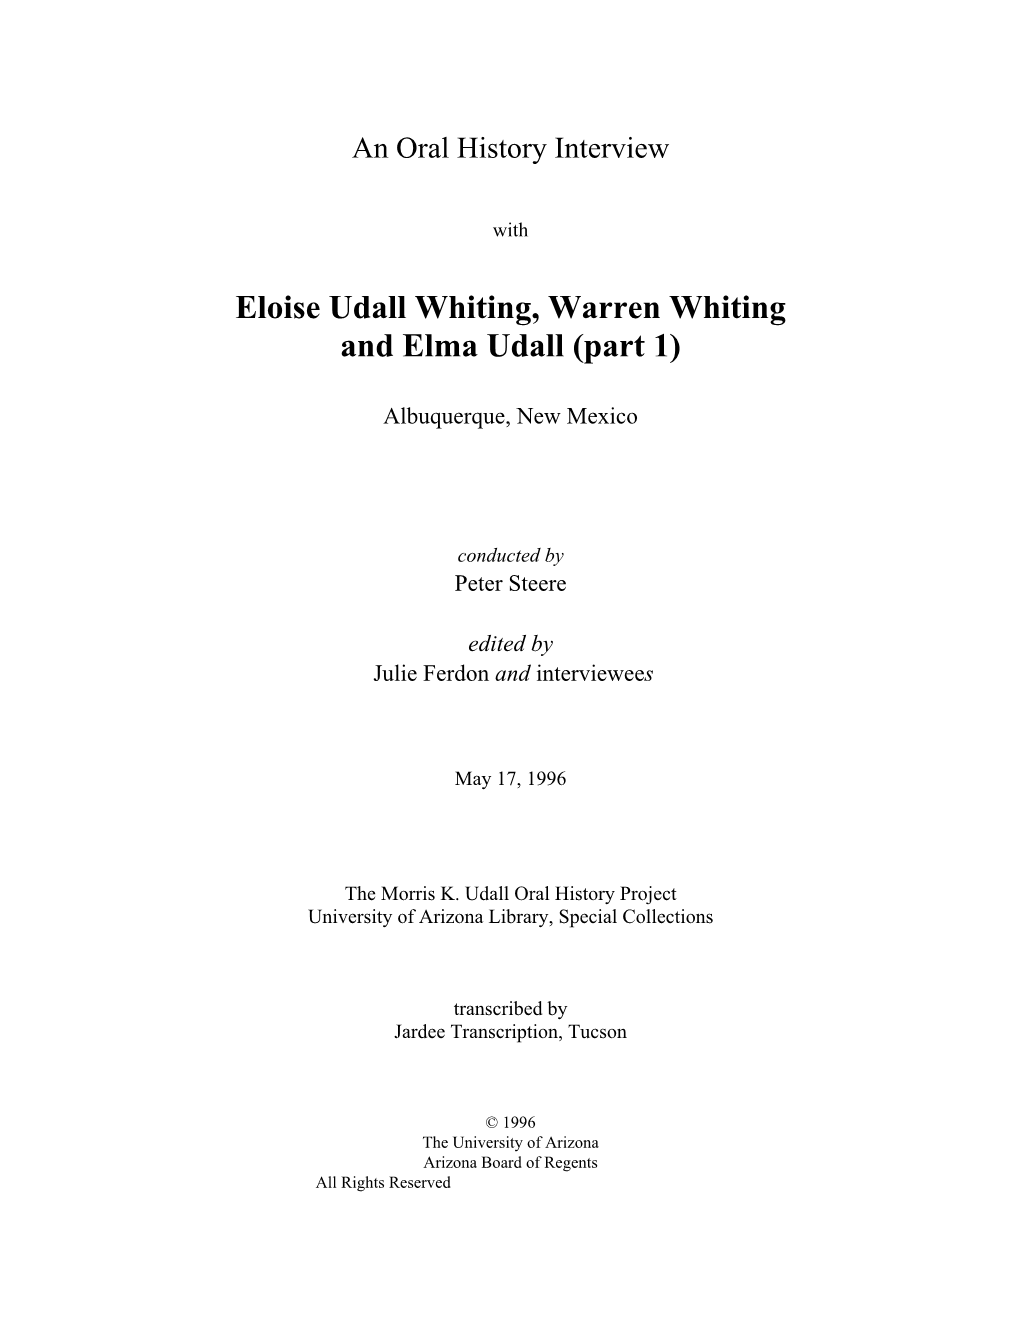 Eloise Udall Whiting, Warren Whiting and Elma Udall (Part 1)